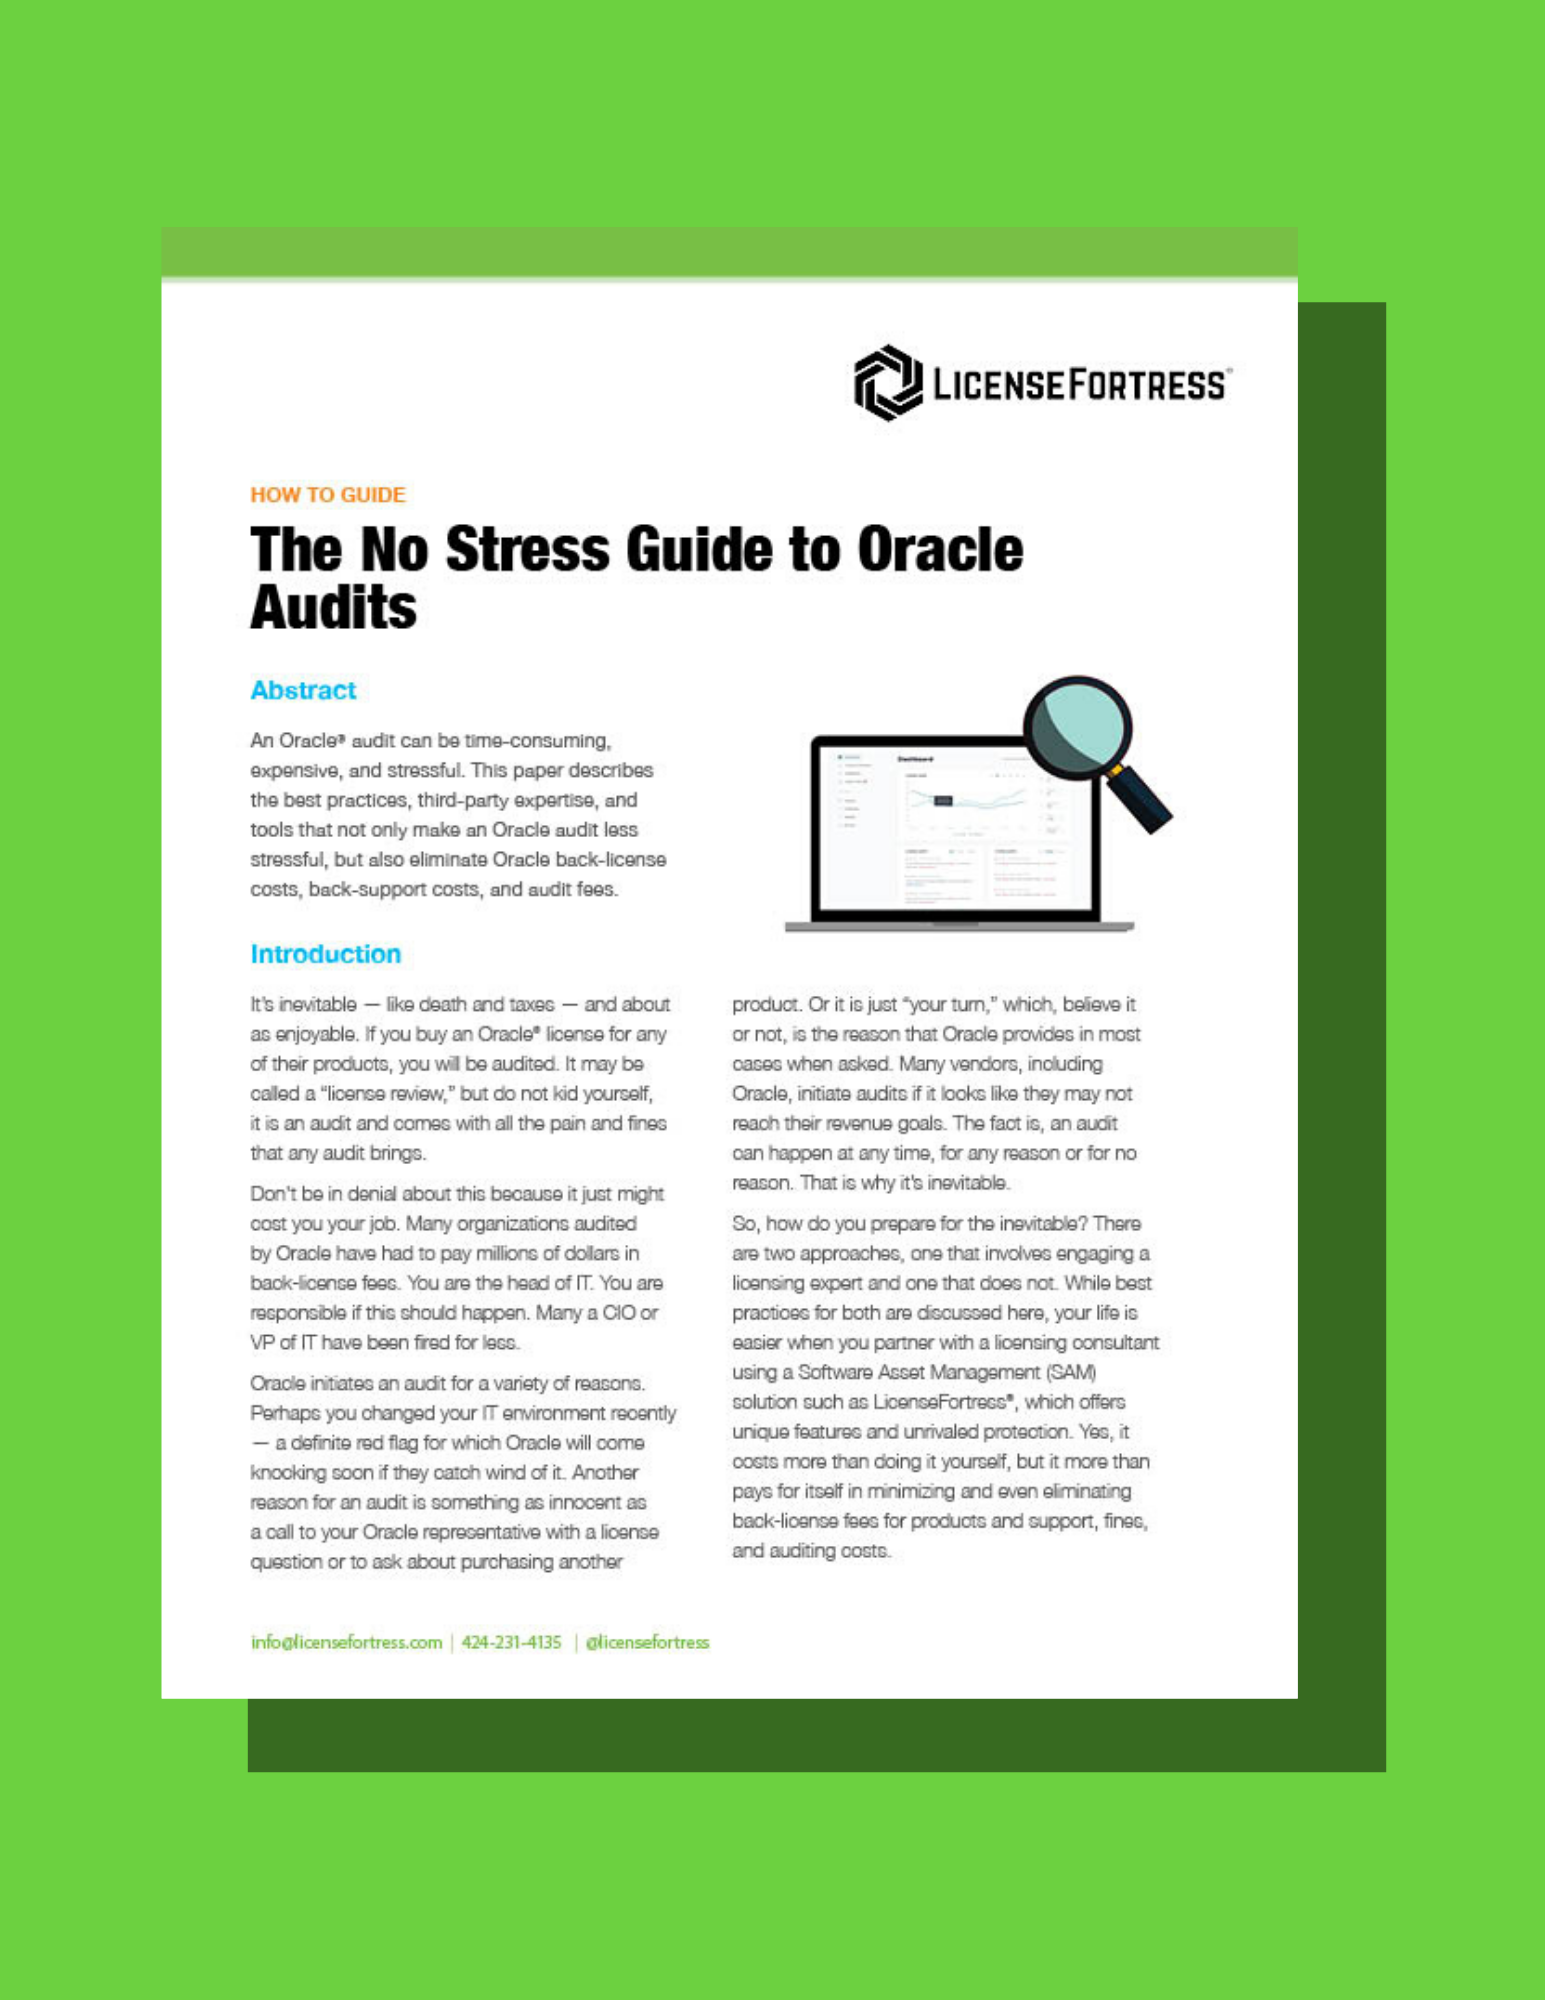 The No Stress Guide to Oracle Audits